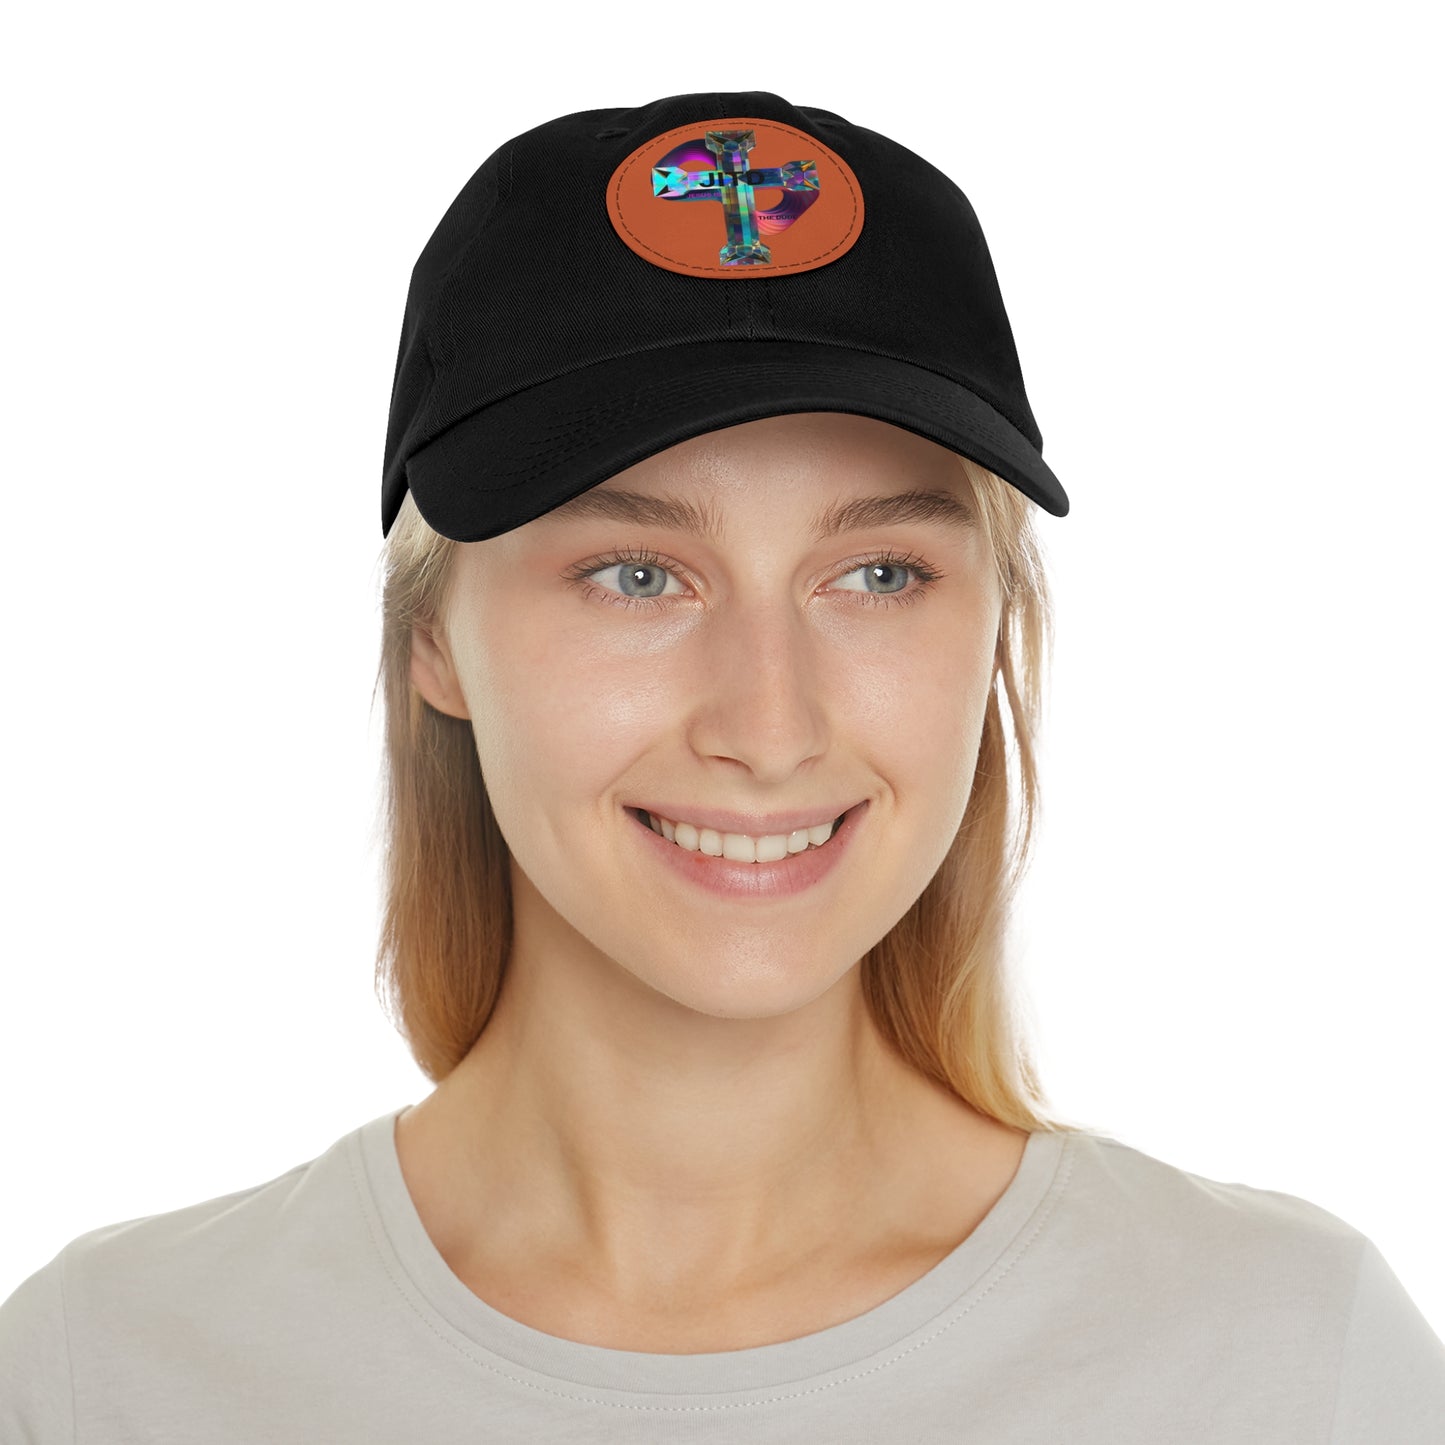 JITD CRYSTAL CROSS HAT WITH LEATHER PATCH